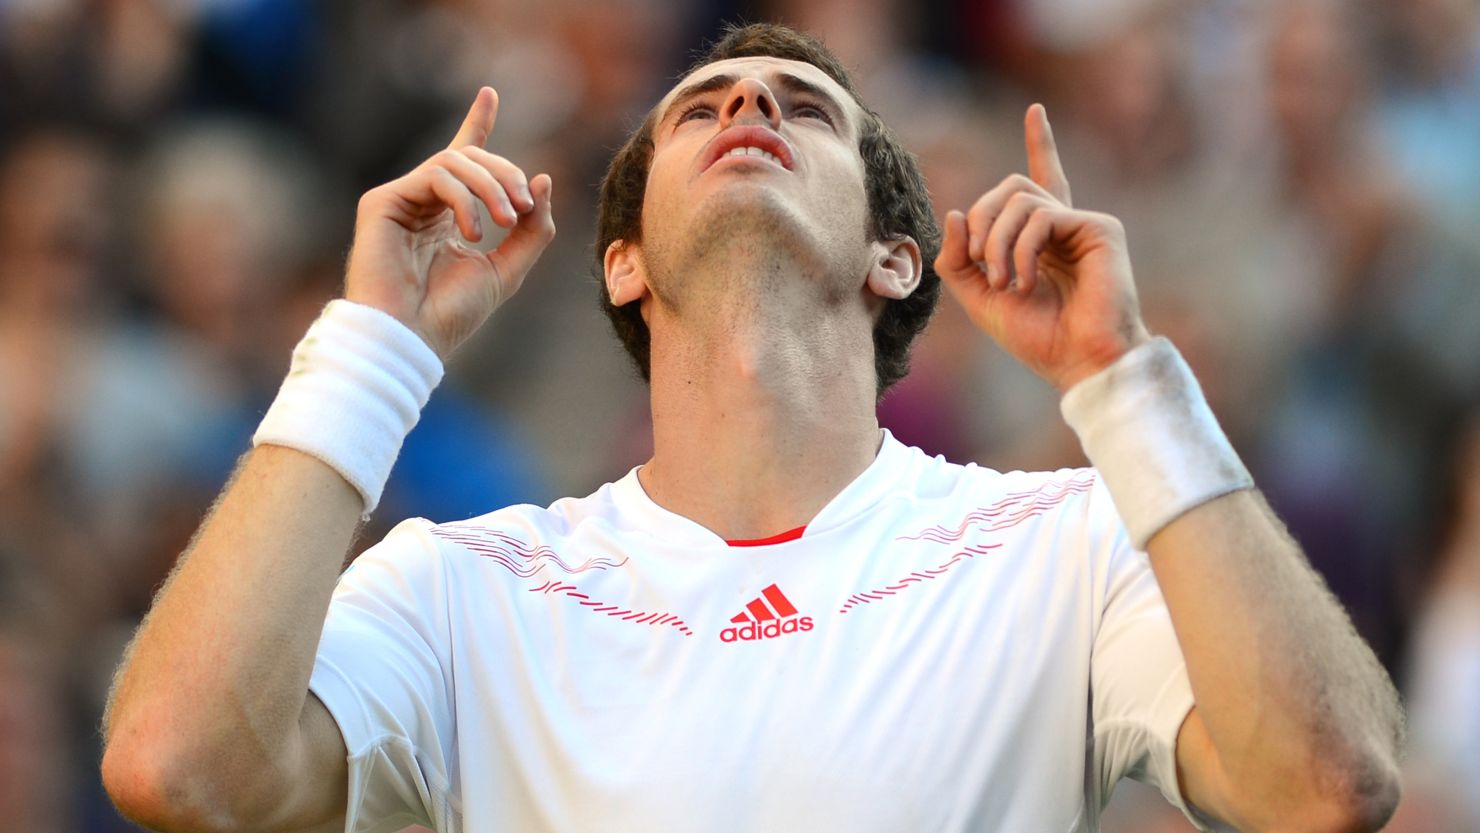 Andy Murray points to the sky after completing his semifinal victory at Wimbledon over Jo-Wilfried Tsonga.